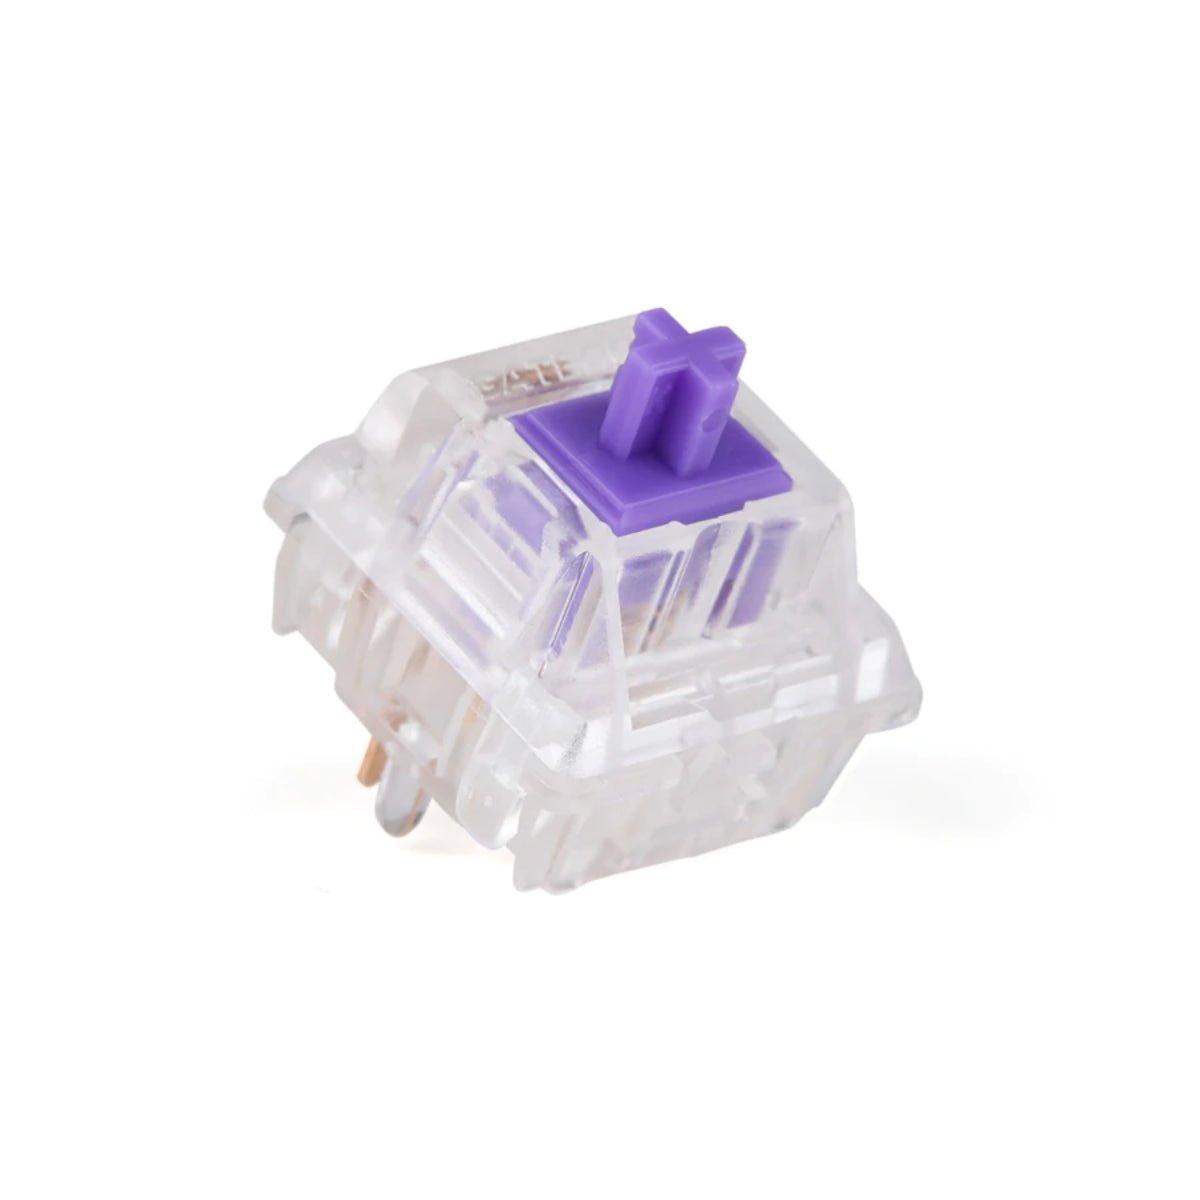 KBD Fans Zeal V2 Tactile Switches 62g - Zealios - Store 974 | ستور ٩٧٤